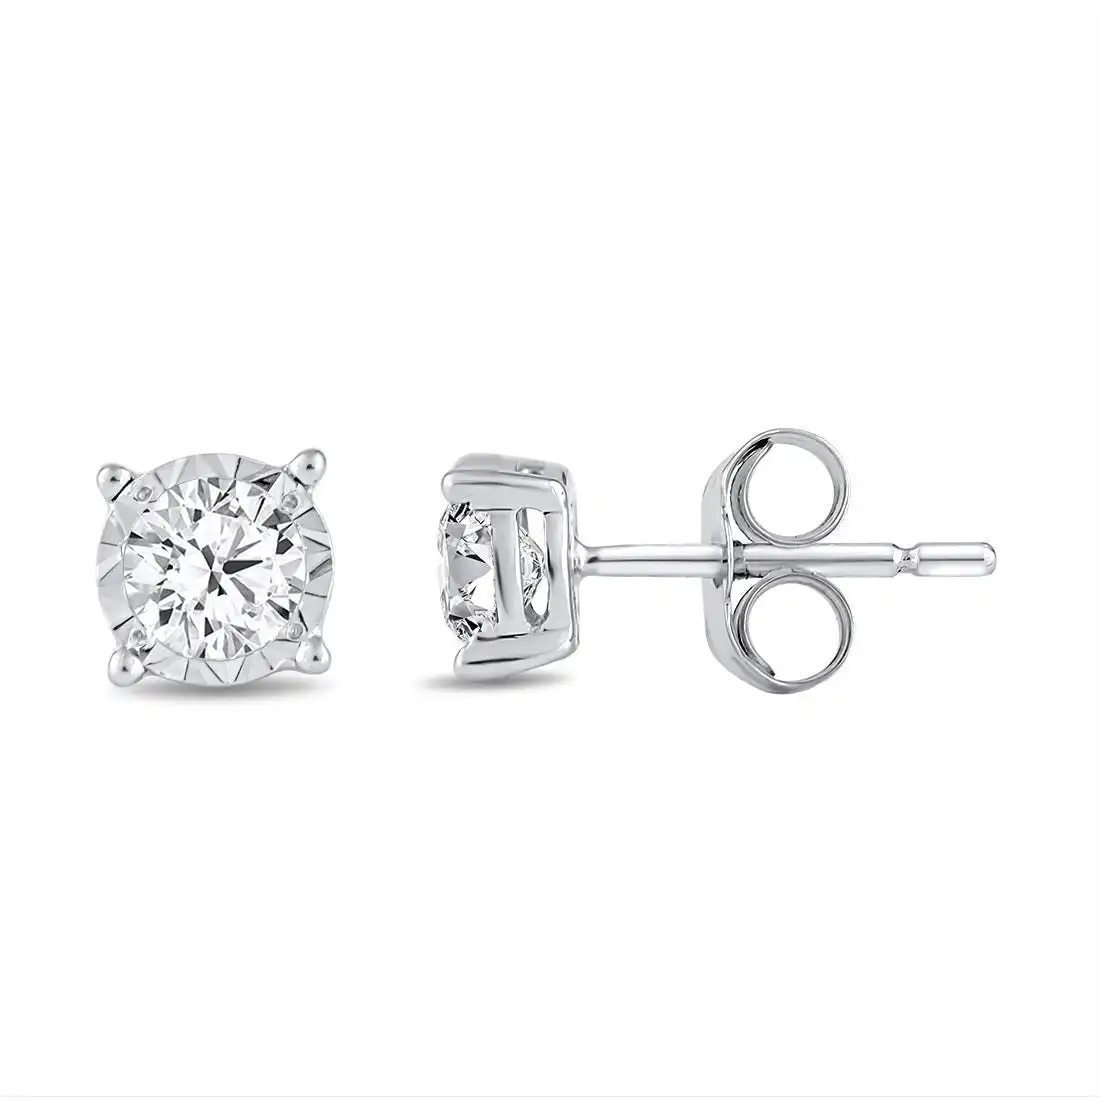 Tia Miracle Halo Earrings with 1/2ct of Diamonds in 9ct White Gold